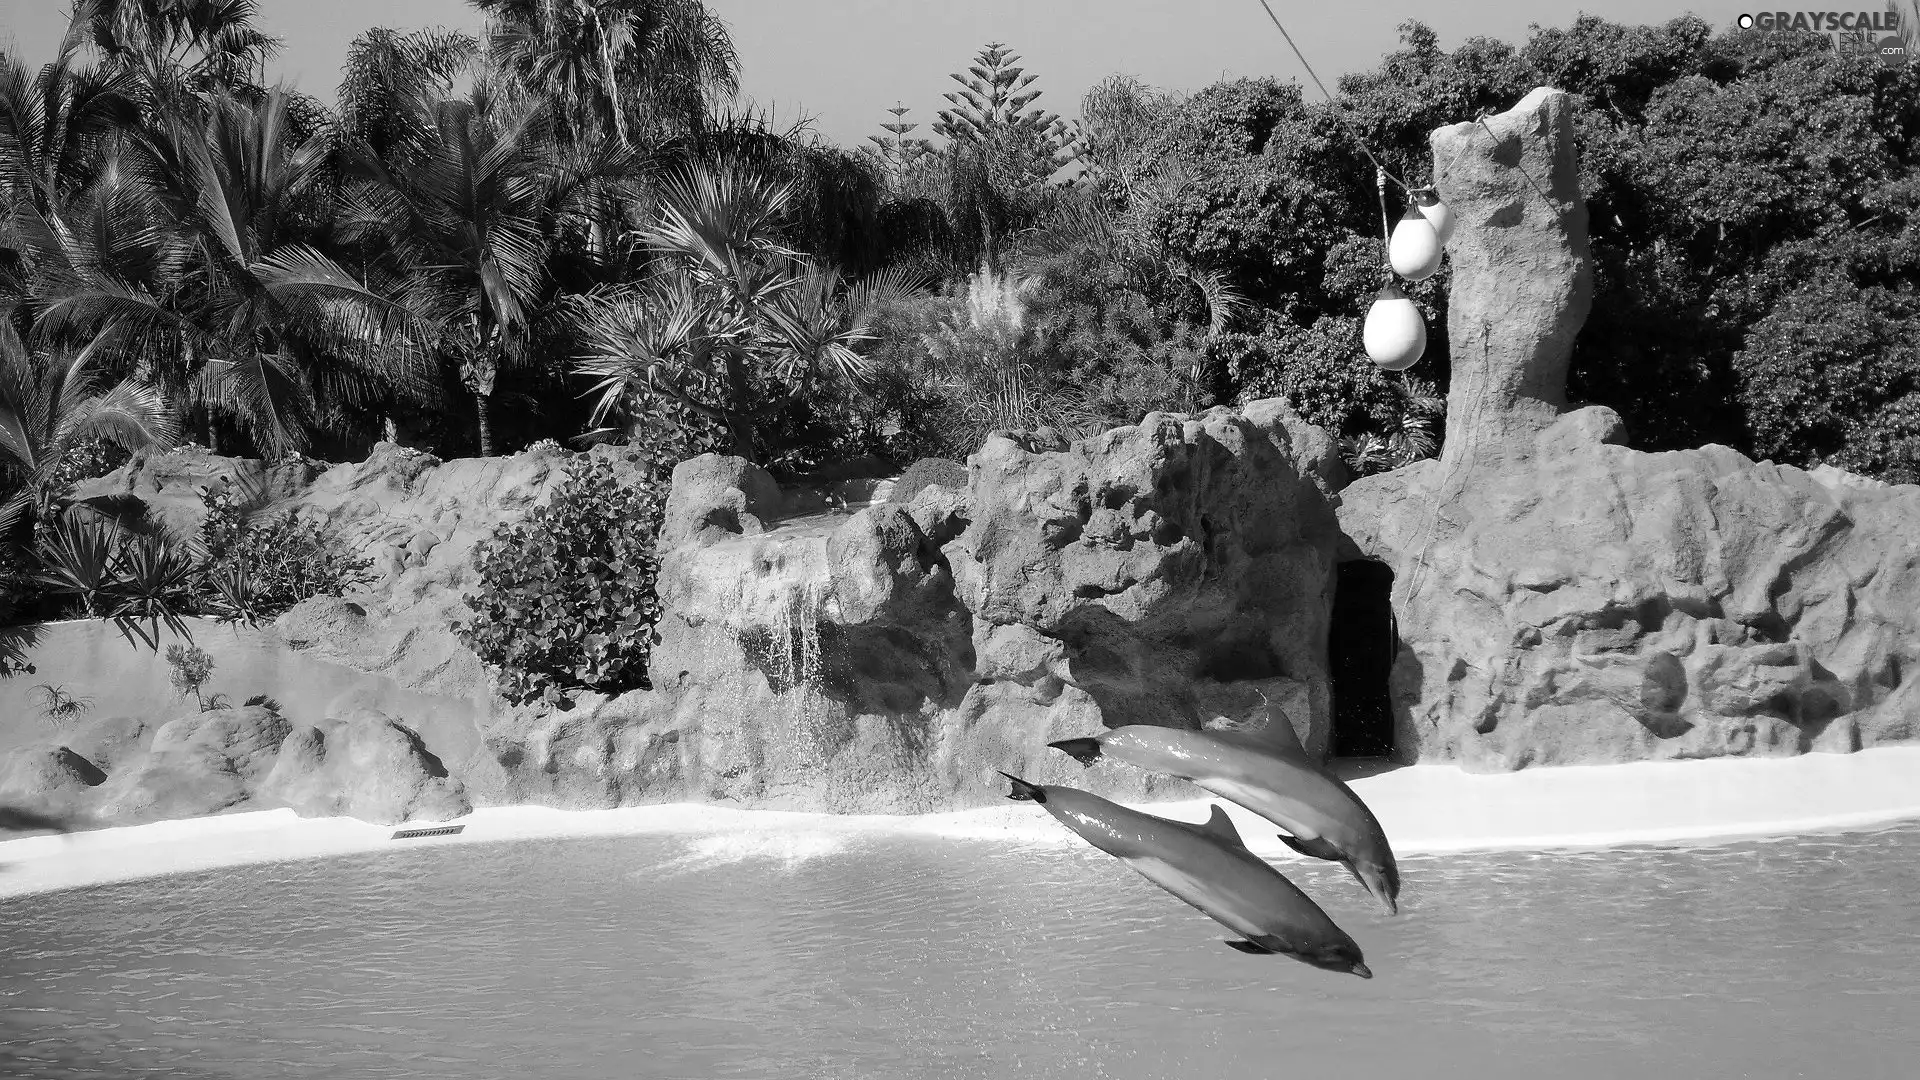 dolphins, rocks, water, jumps